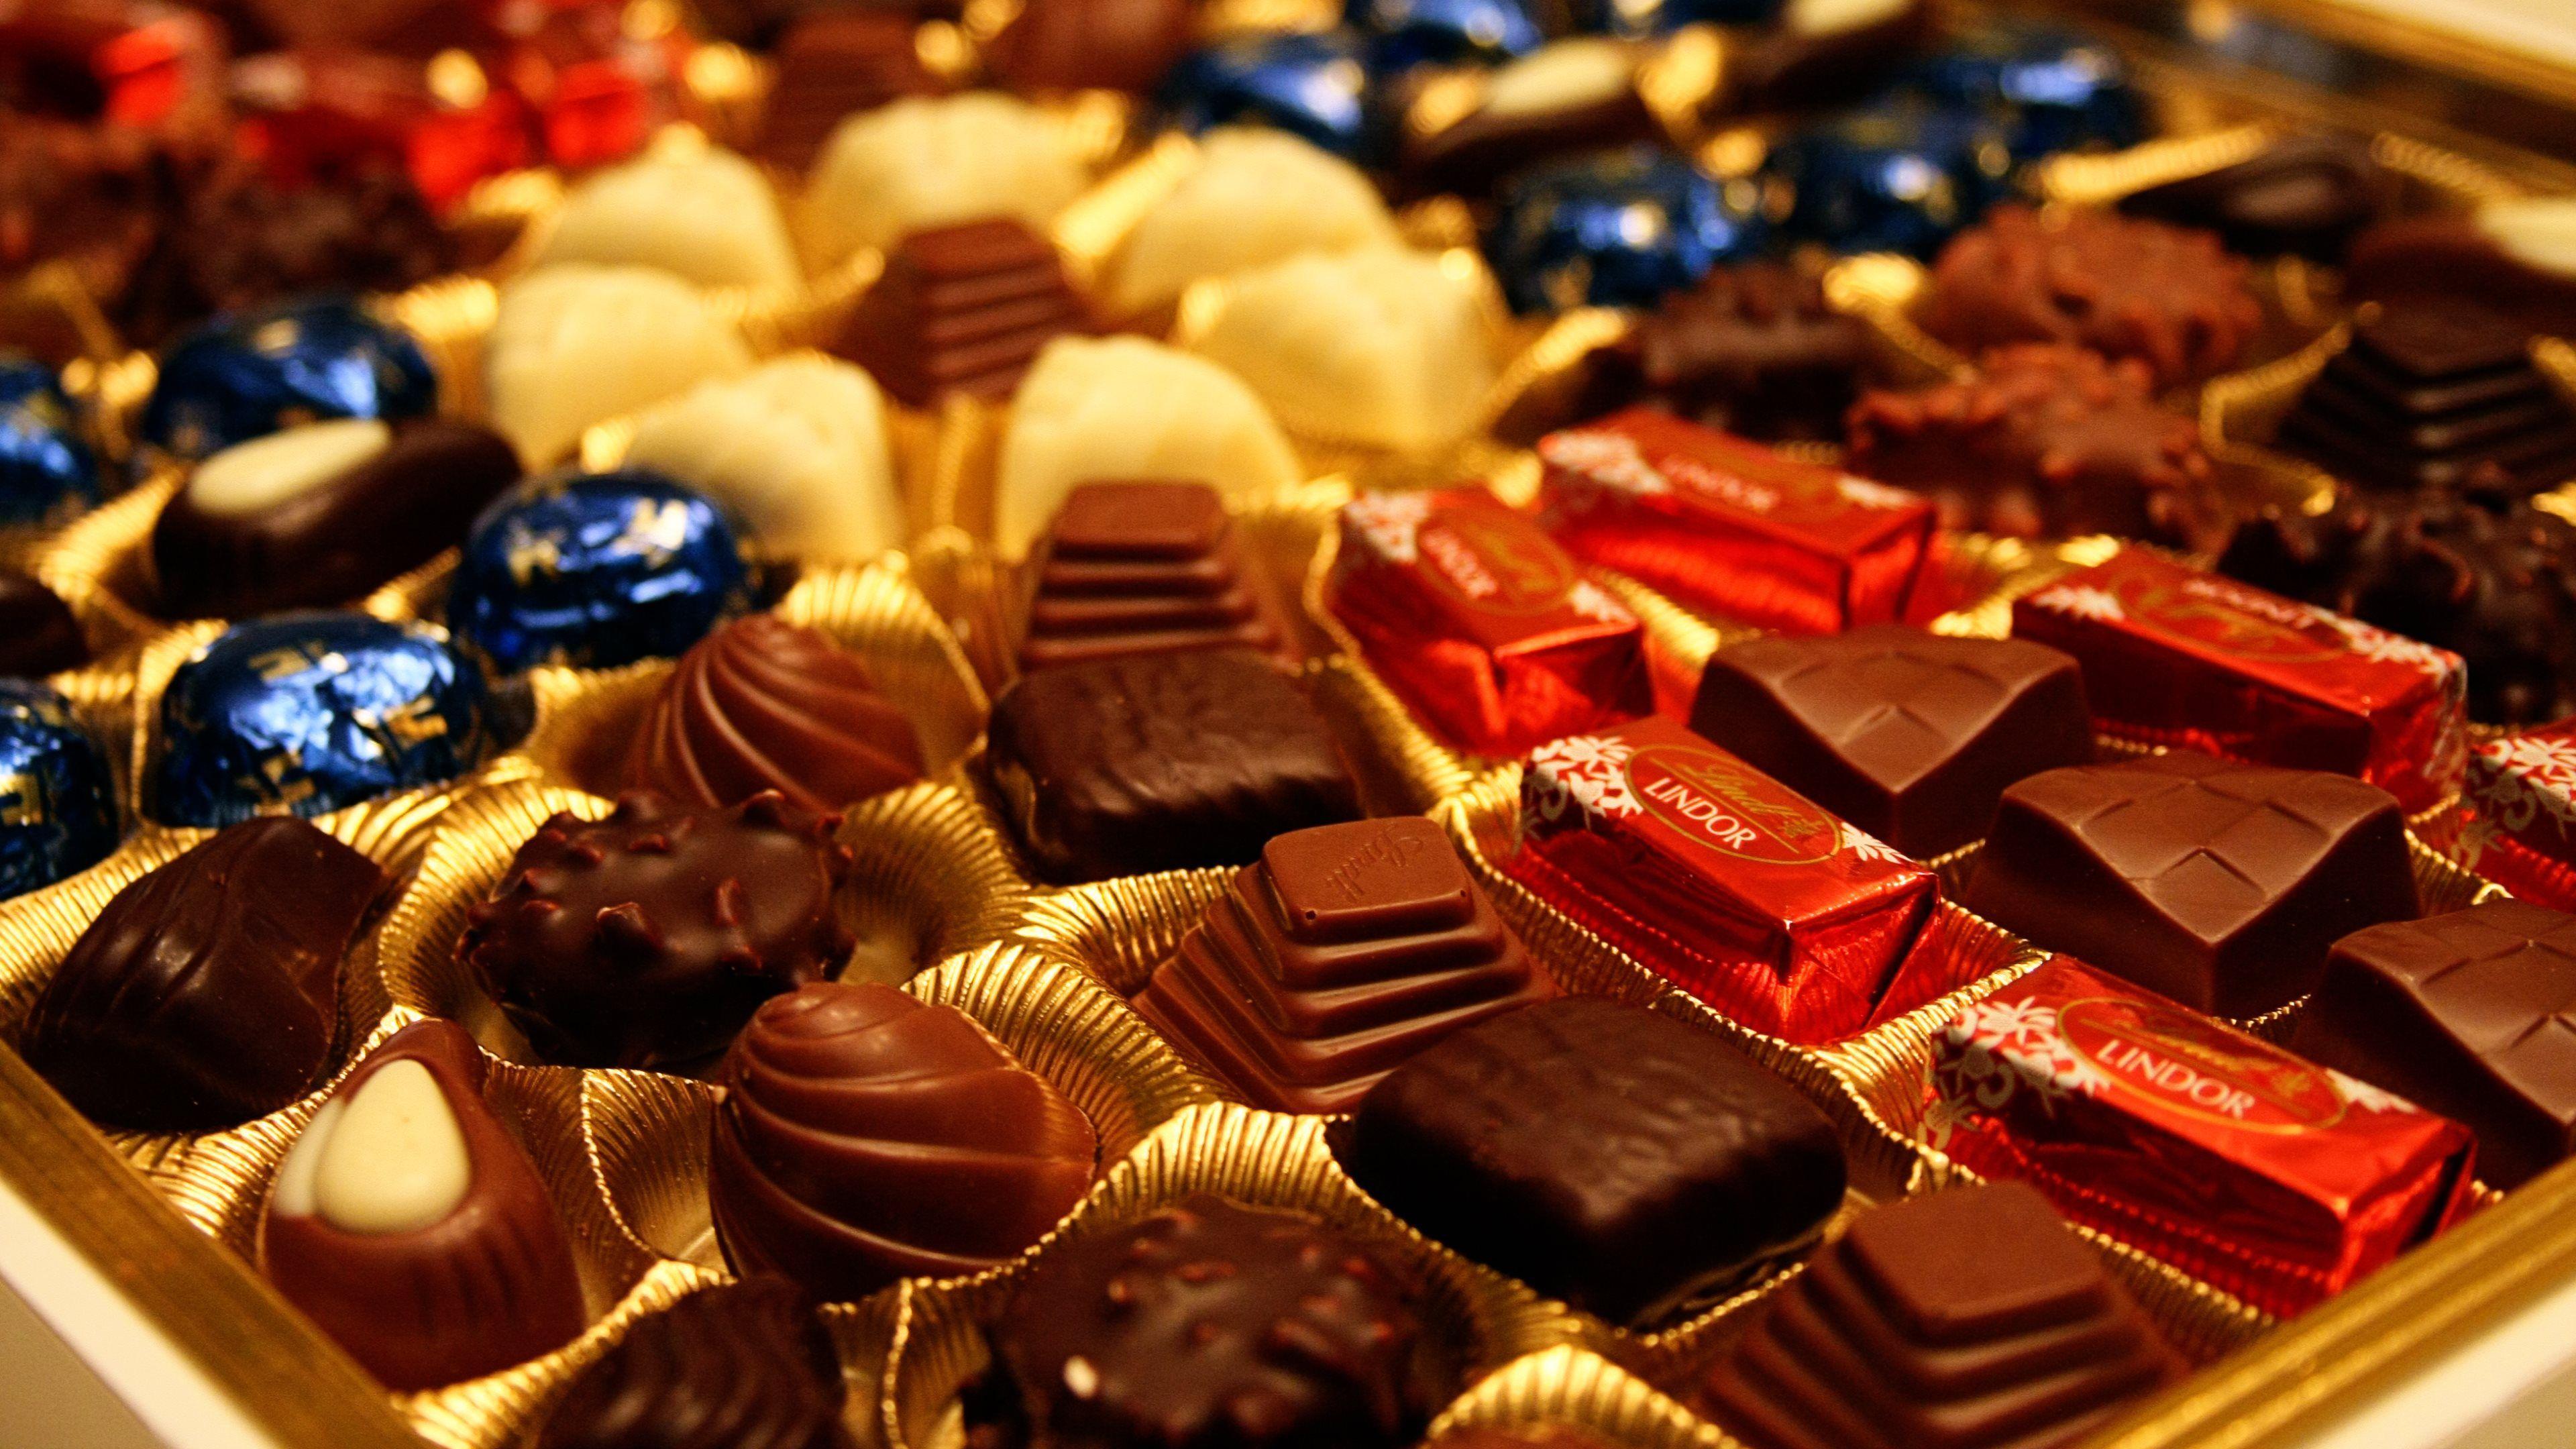 Box of Chocolates Wallpaper in HD, 4K and wide sizes